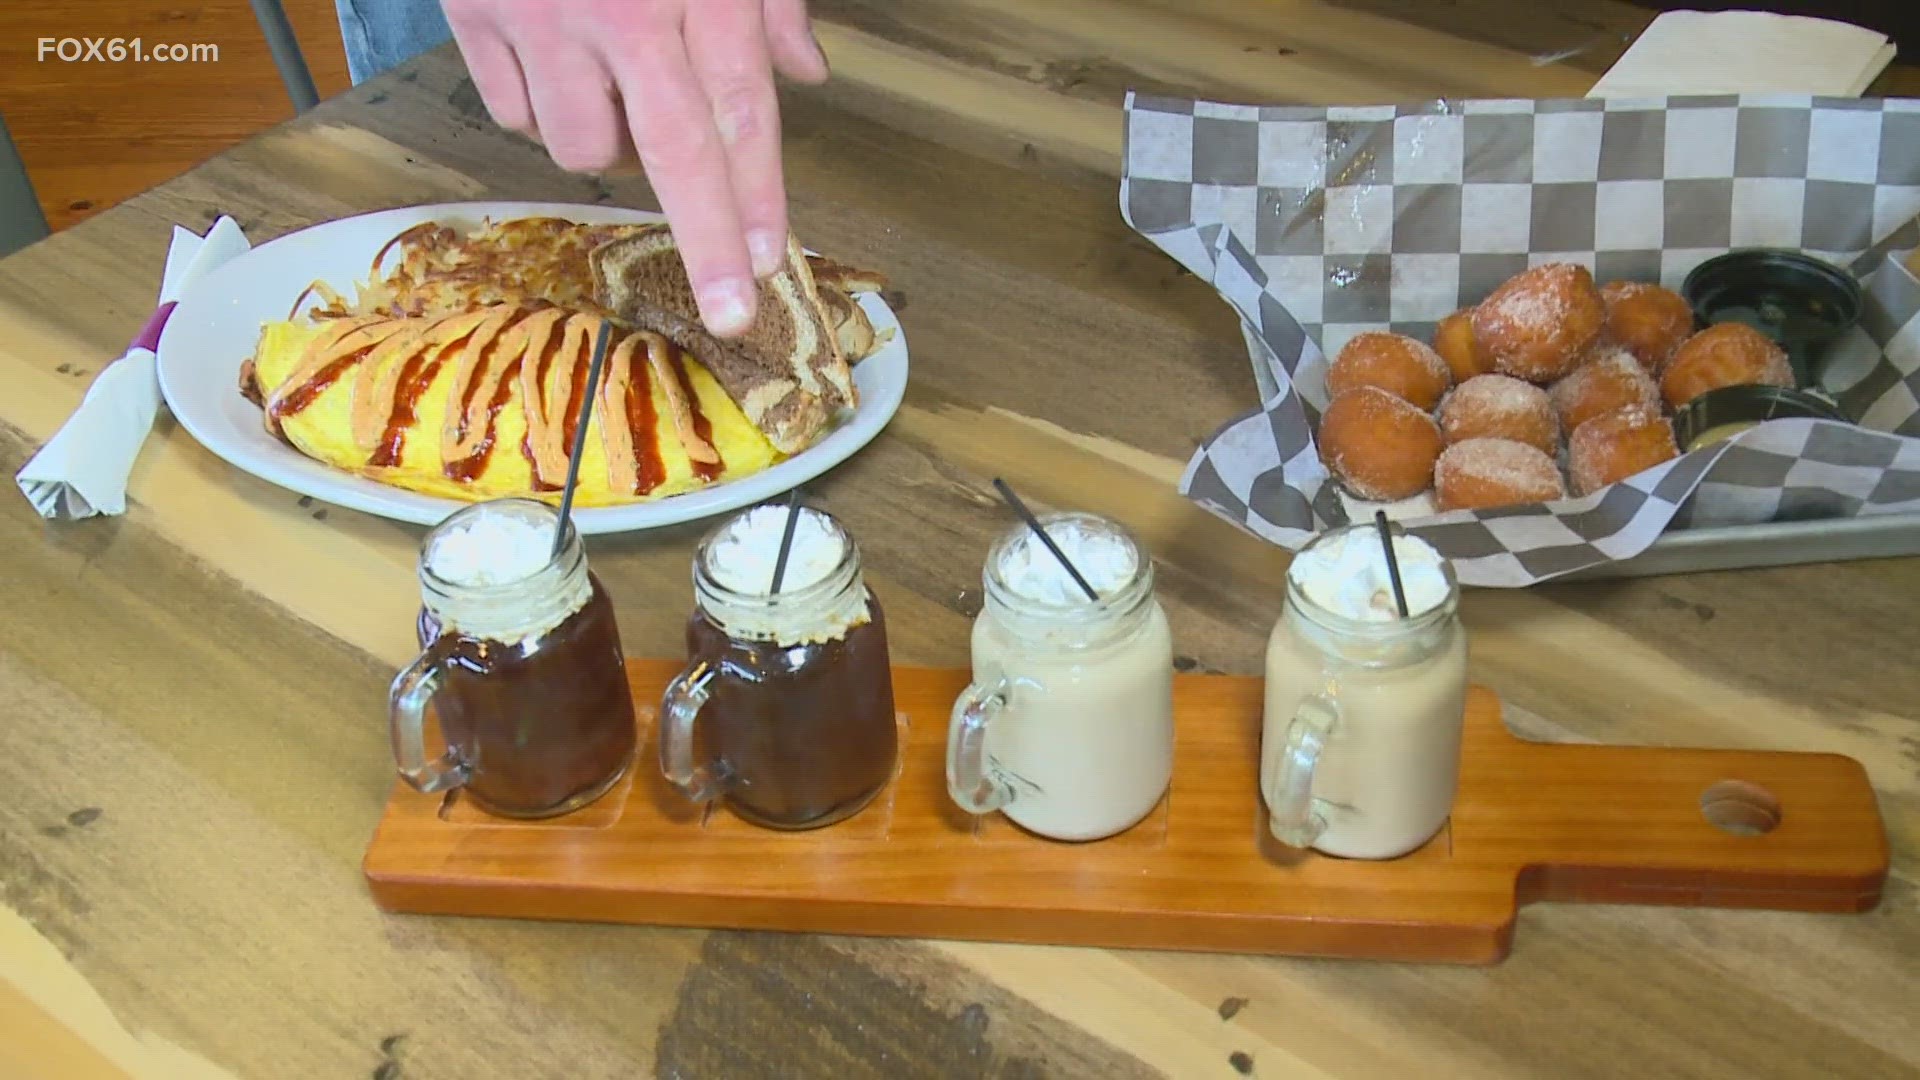 FOX61's Foodie Friday featured Ellie's Farmhouse in Southington.